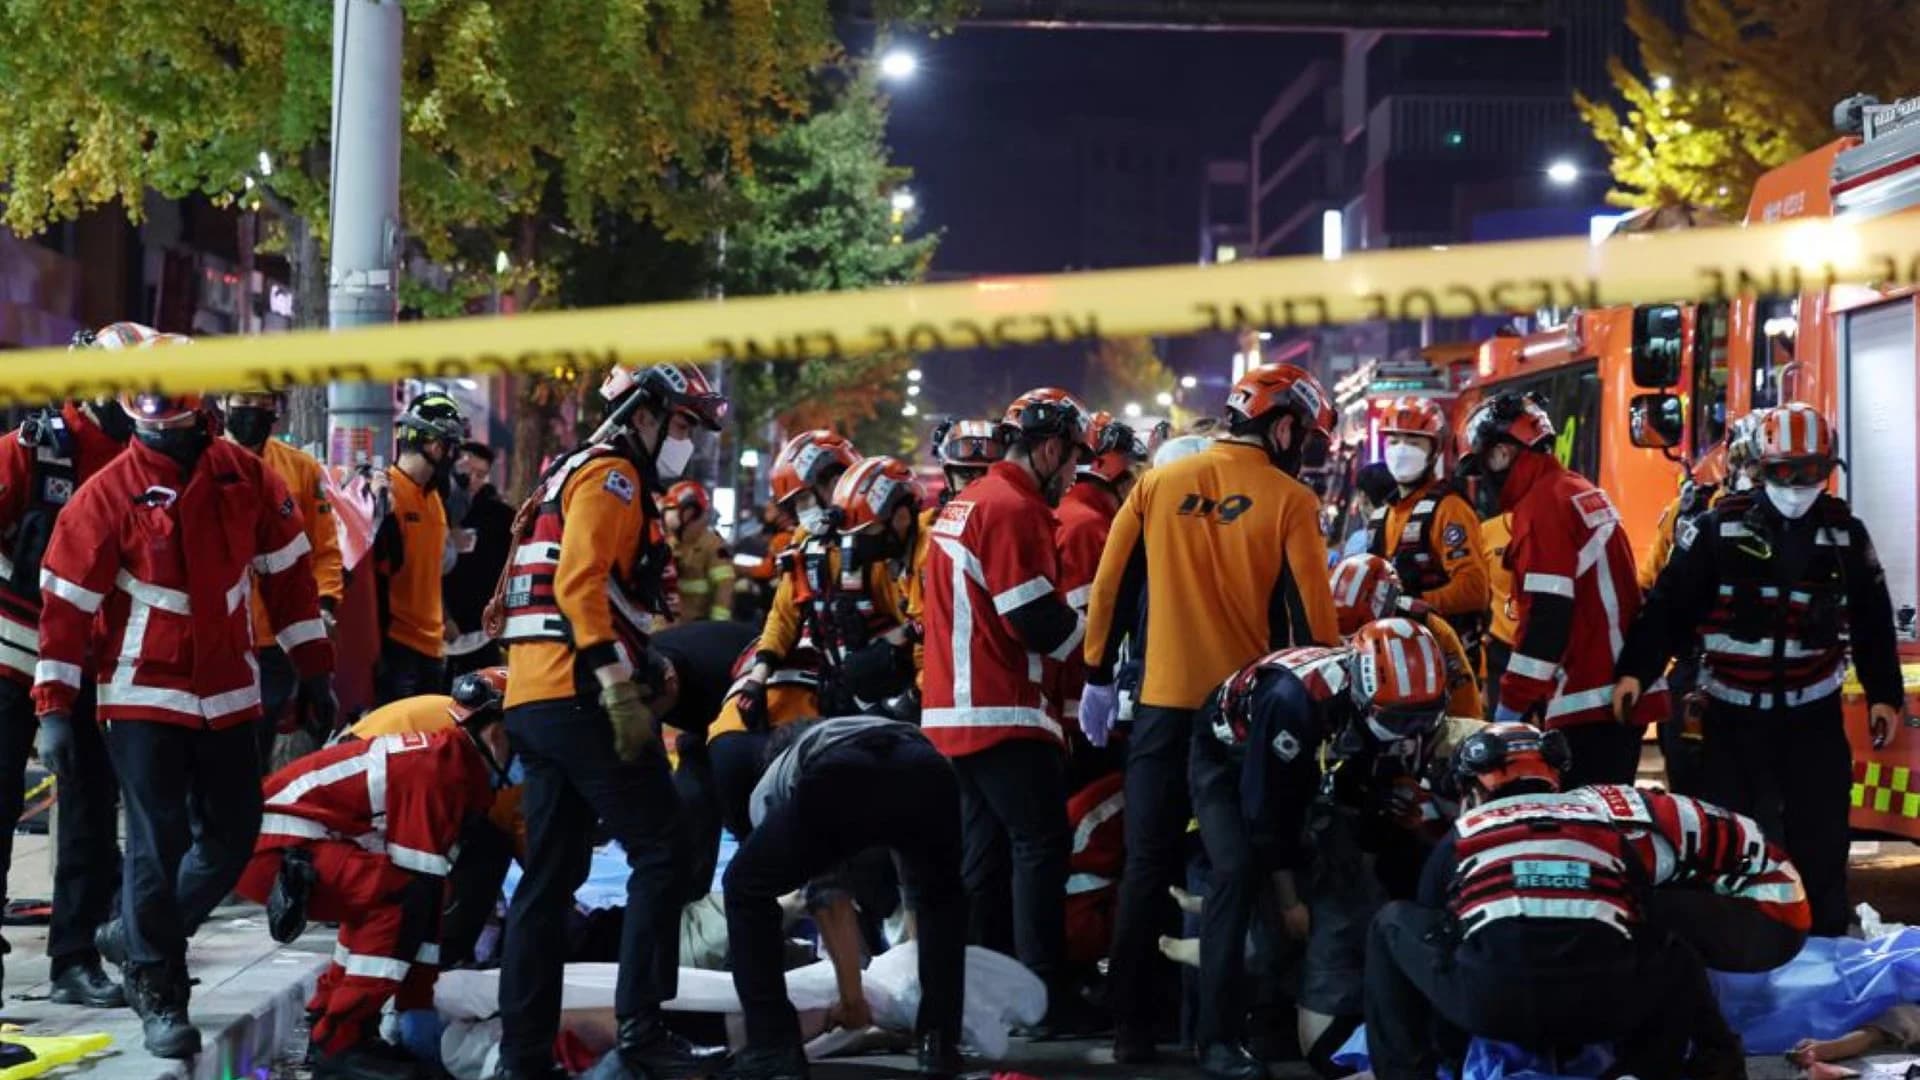 Officials: 146 dead after Halloween crowd surge in Seoul